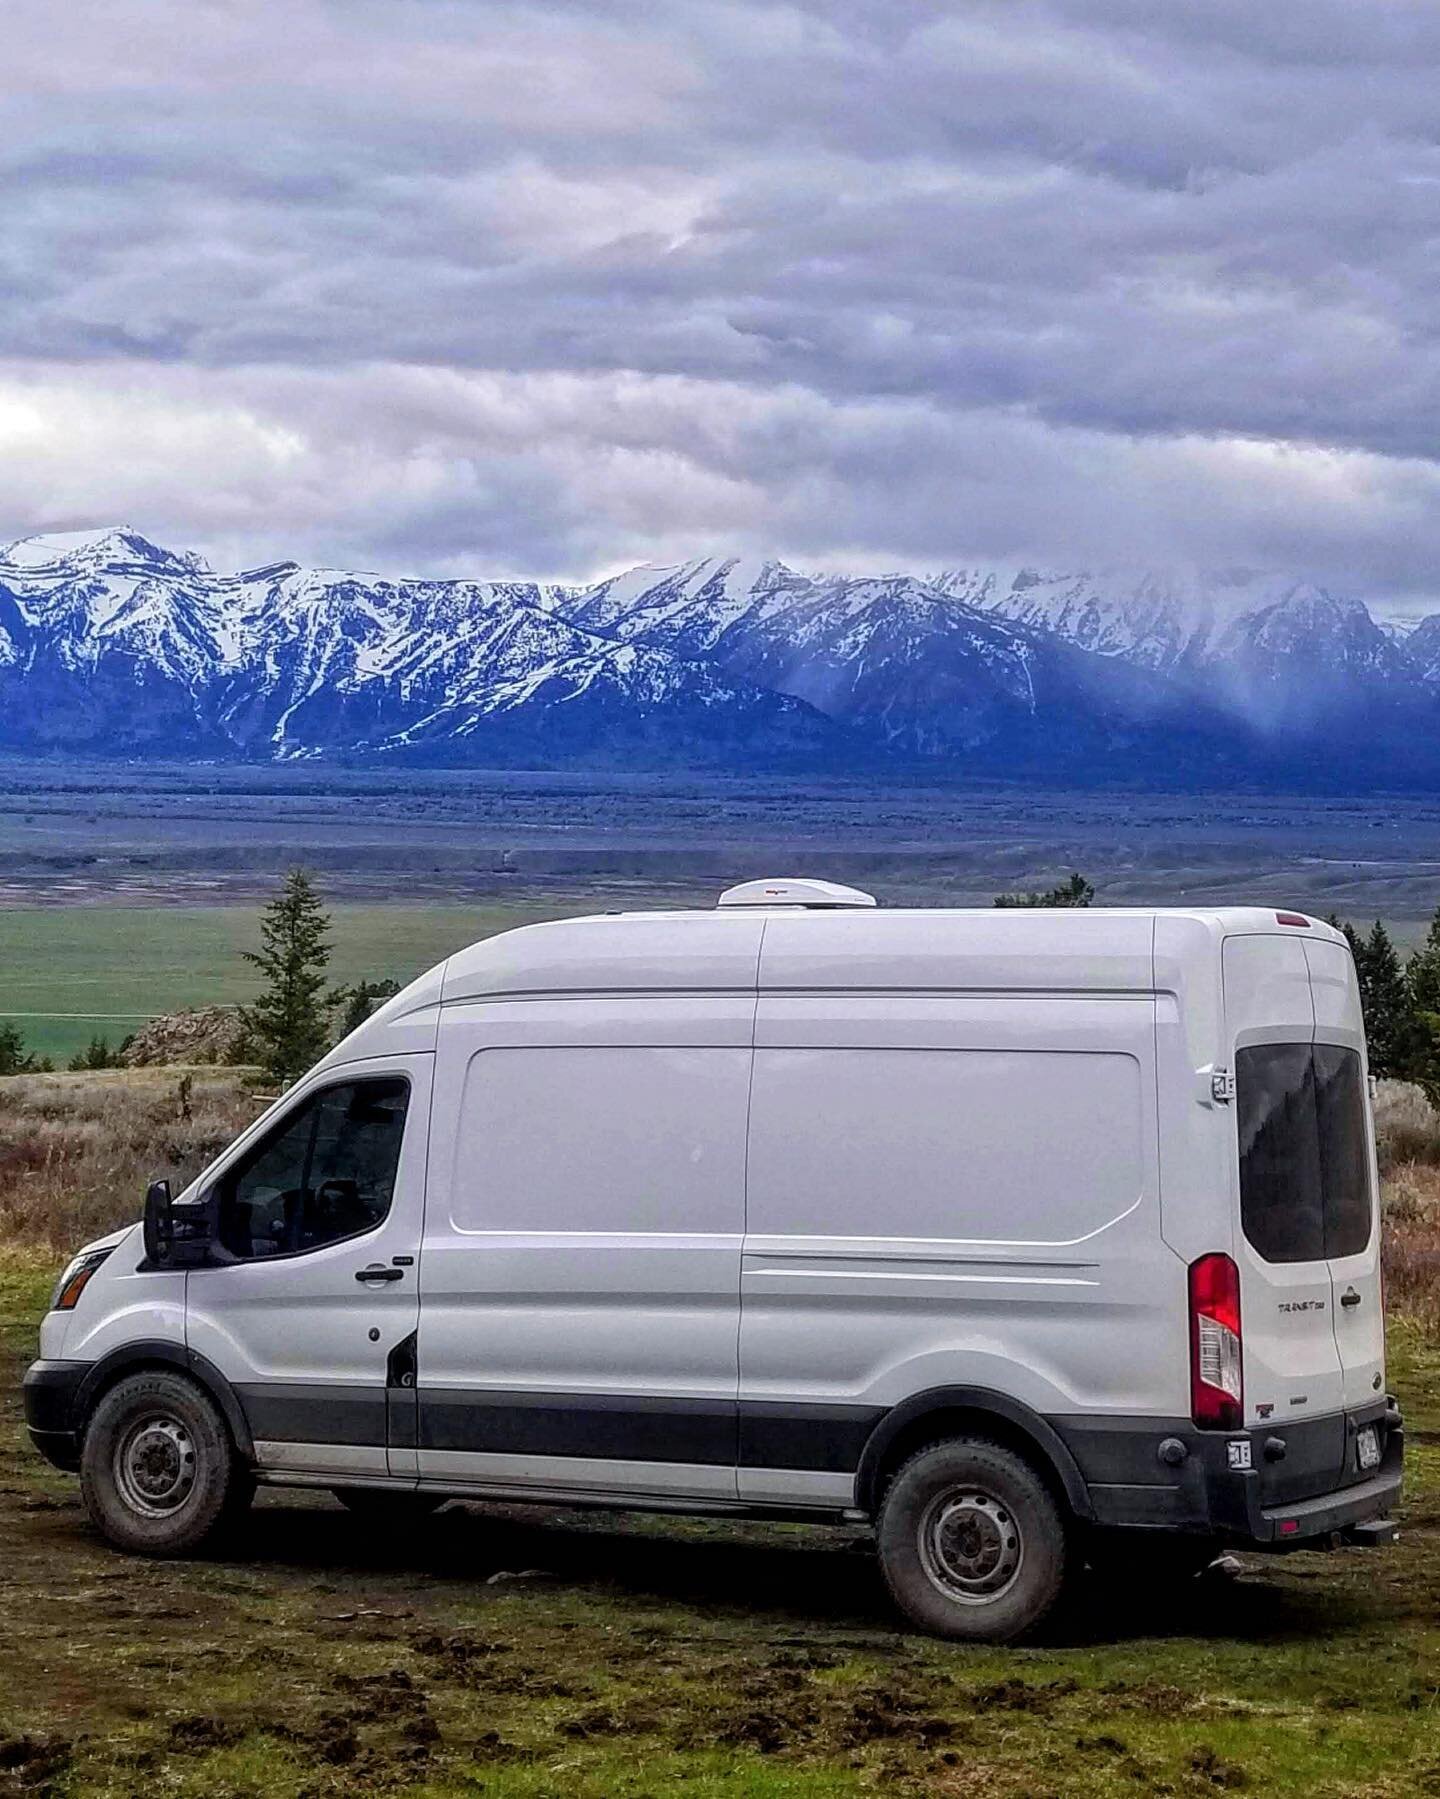 You know what else is spooky about October, our first snowfall and taste of the winter to come❄️
.
.
.
.
.
#vanlifeisthegoodlife #vanlifemoments  #homeiswhereyouparkit #vanlifediaries #vanlifedistrict #campervanconversion #vanlifemovement #vanlifeexp